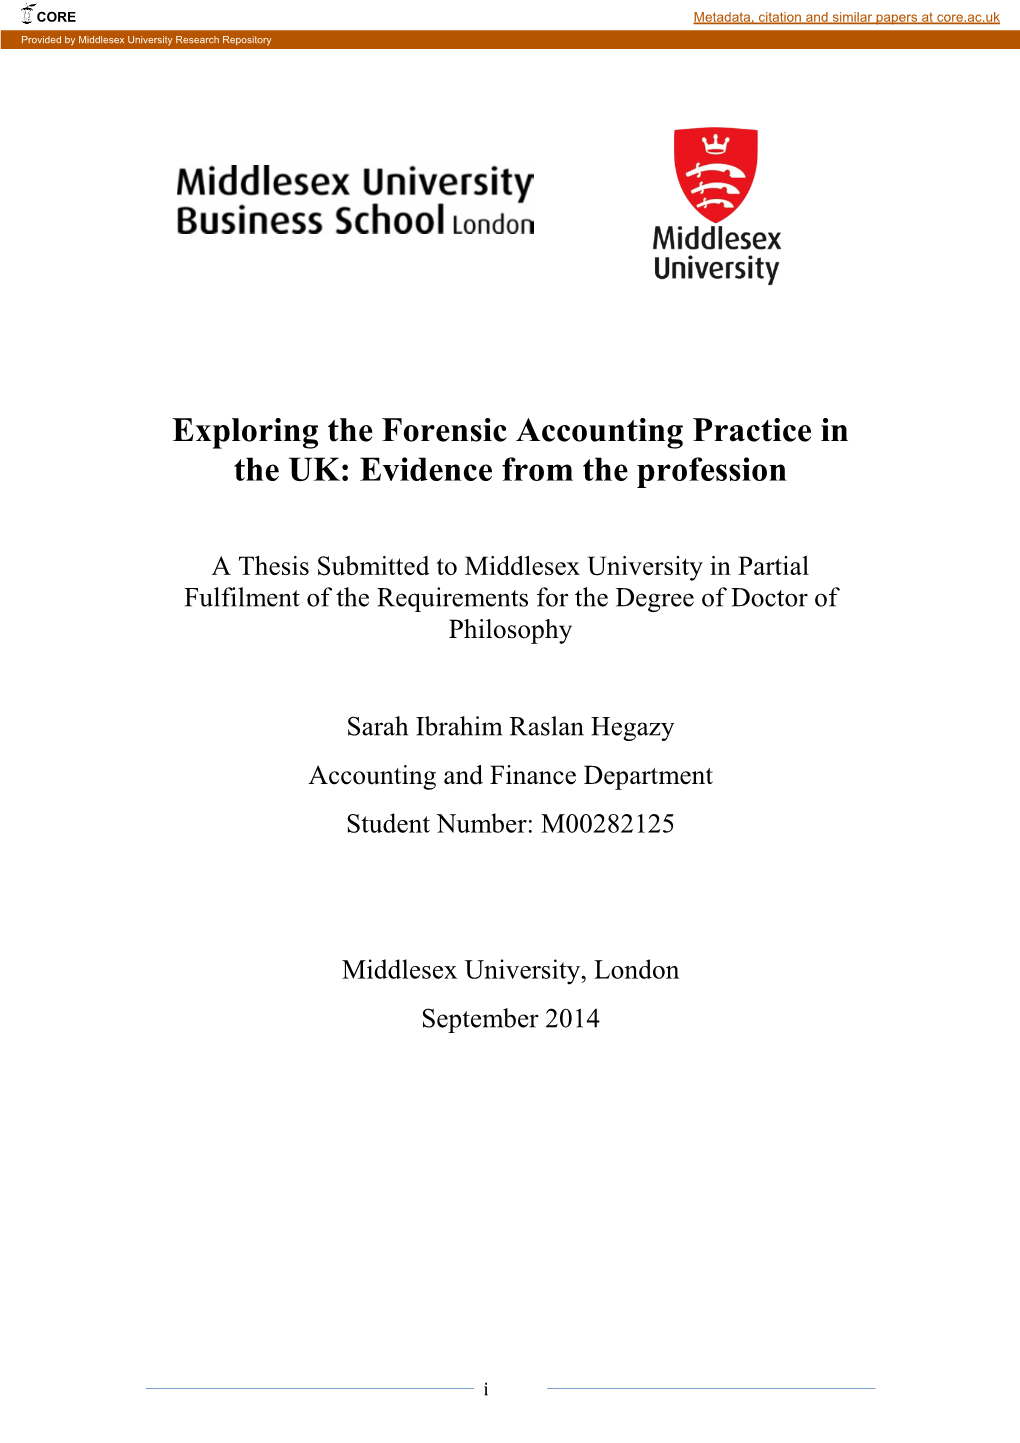 Forensic Accounting Practice in the UK: Evidence from the Profession